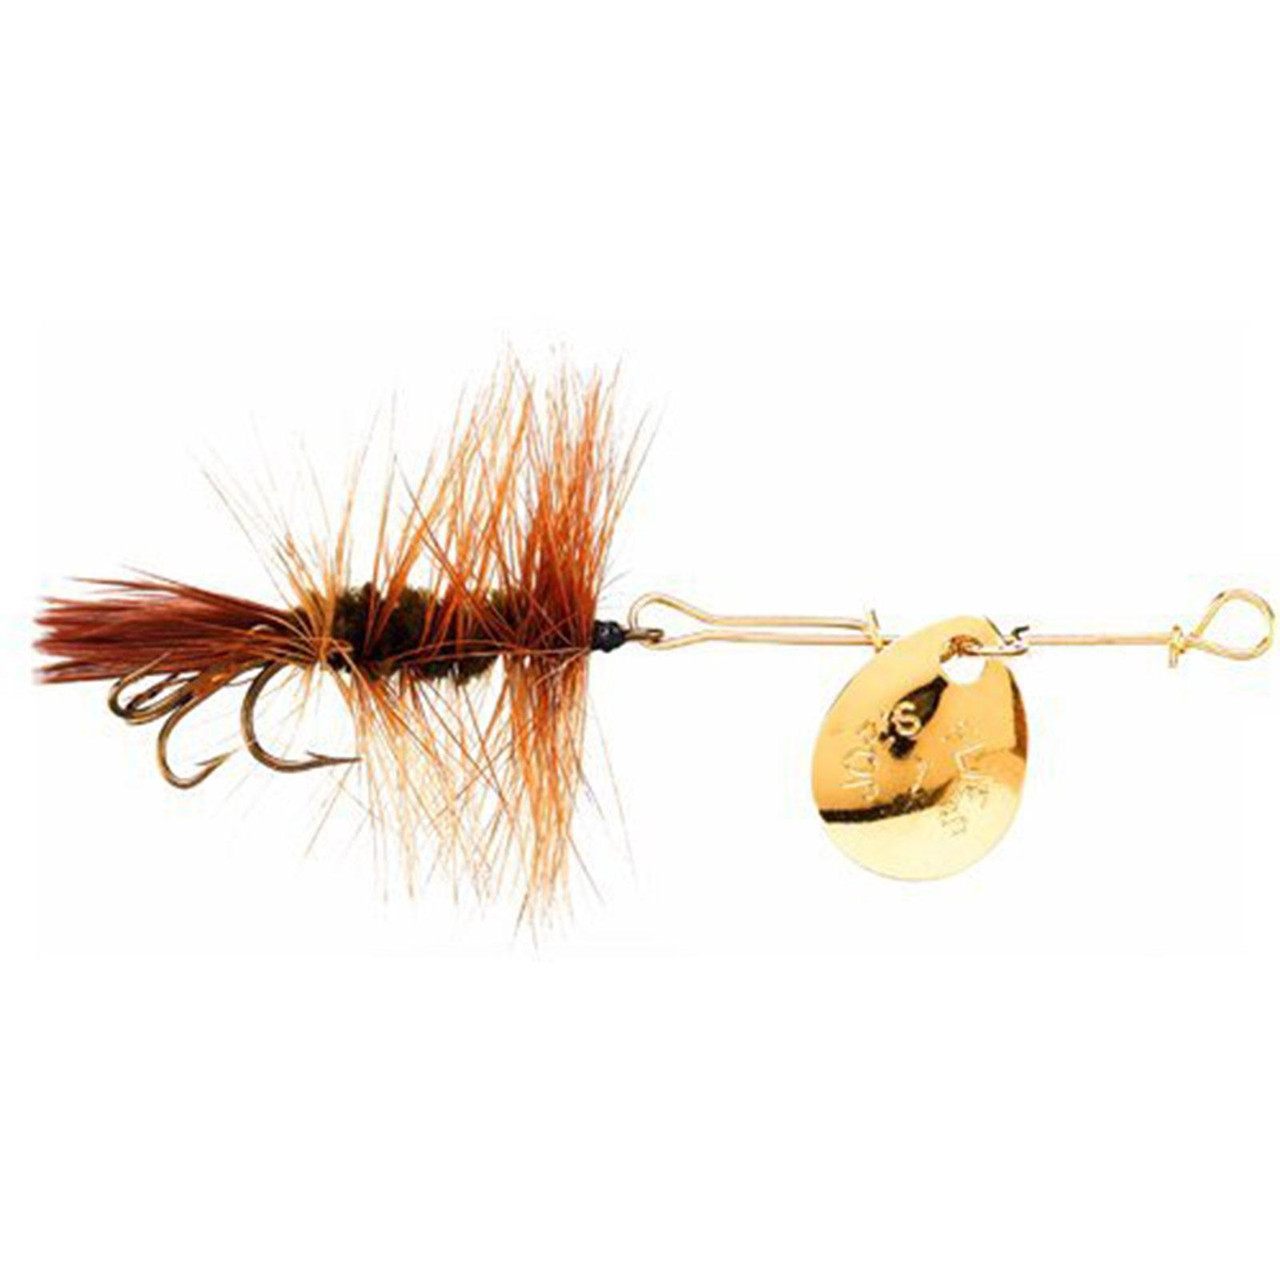 Joes Flies Short Strike - Fin Feather Fur Outfitters